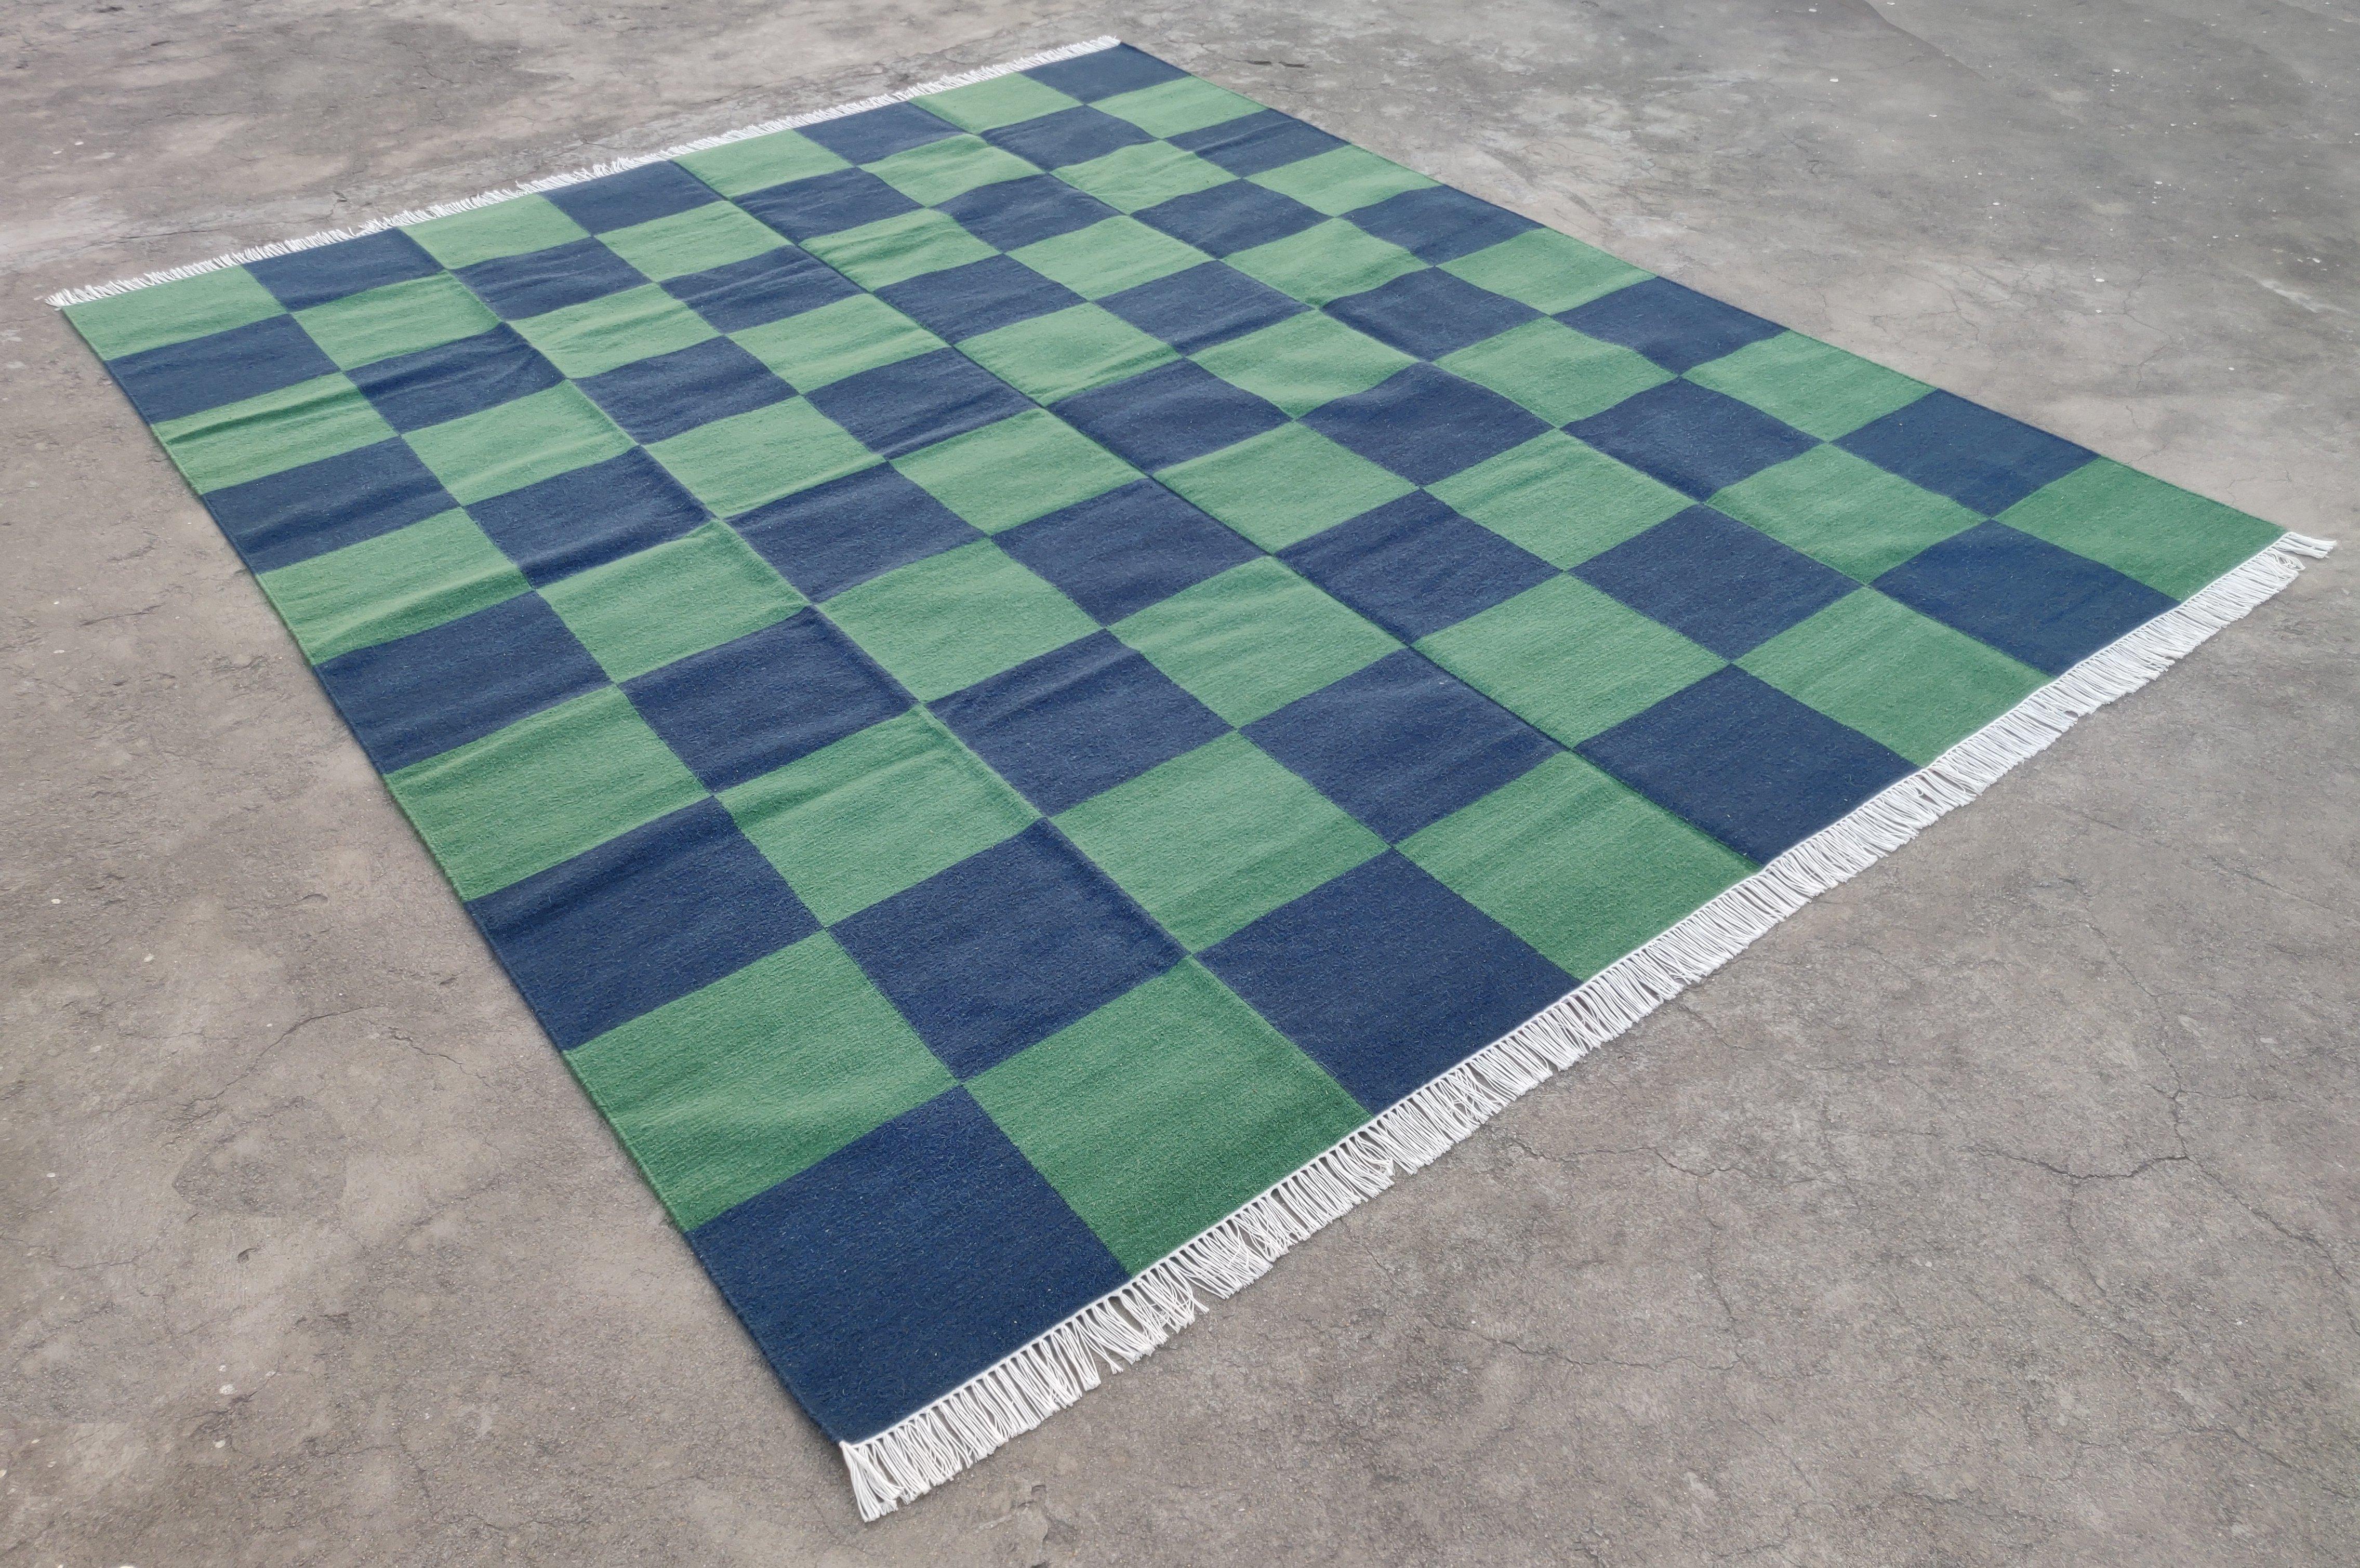 Woolen Vegetable Dyed Reversible Green And Blue Indian Tile Checked Rug - 6'x9'
These special flat-weave dhurries are hand-woven with 15 ply 100% cotton yarn. Due to the special manufacturing techniques used to create our rugs, the size and color of